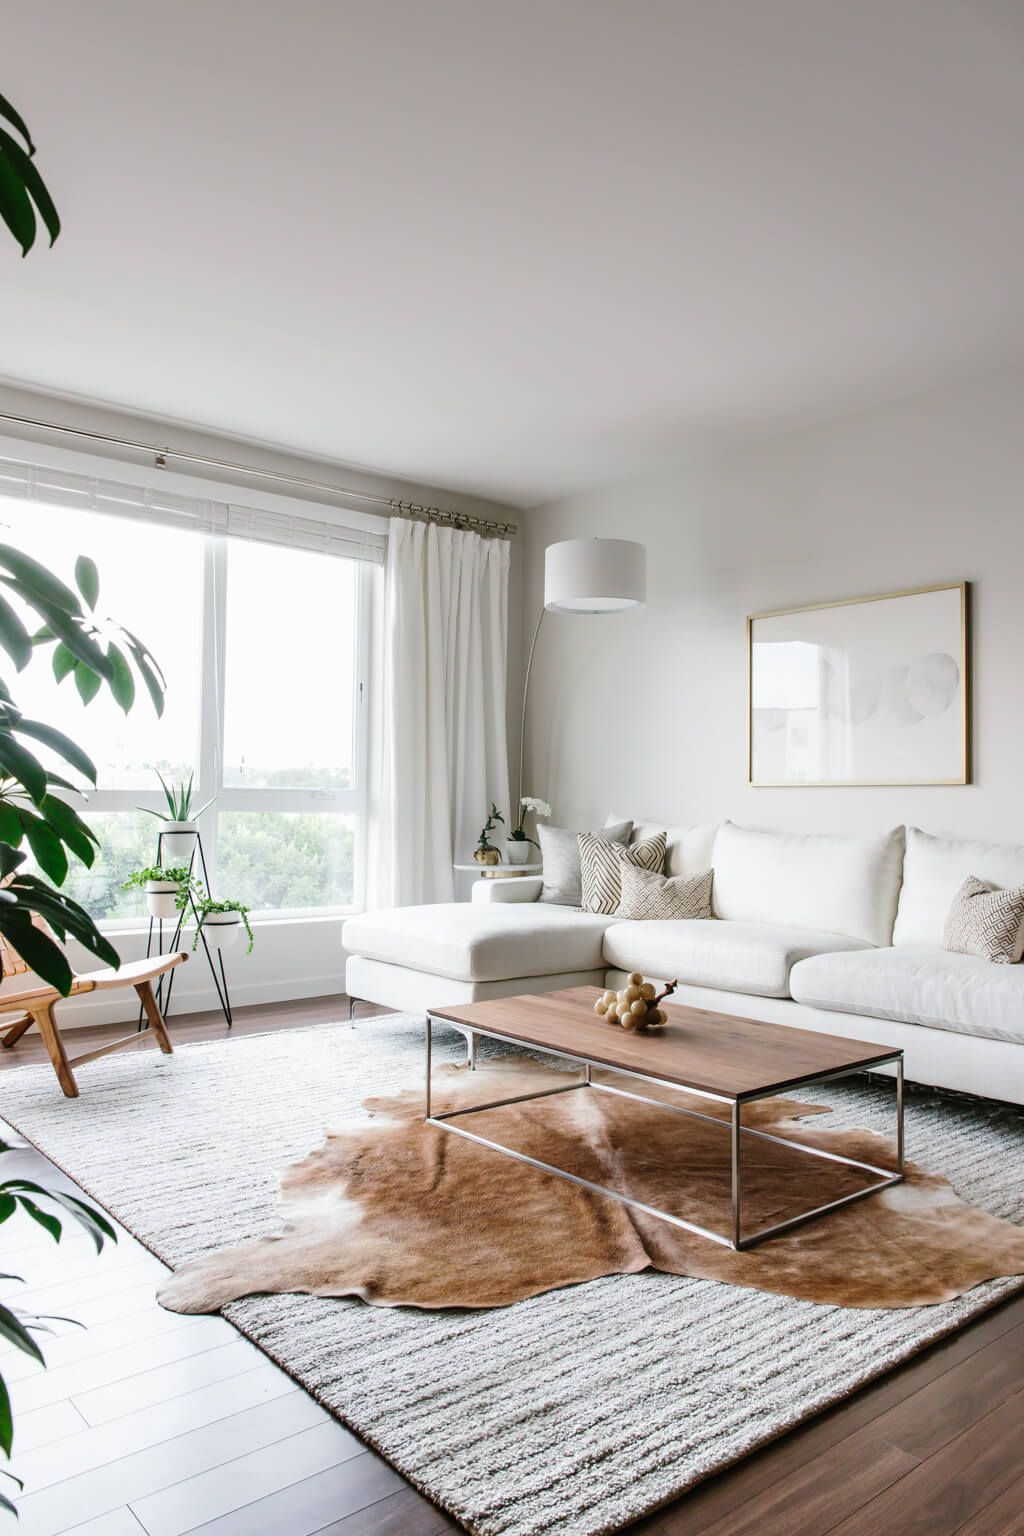 Take a tour of my modern and minimalist living room. My interior design  style is a blend of minimalism, mid-century modern, Scandinavian and SoCal  vibes.